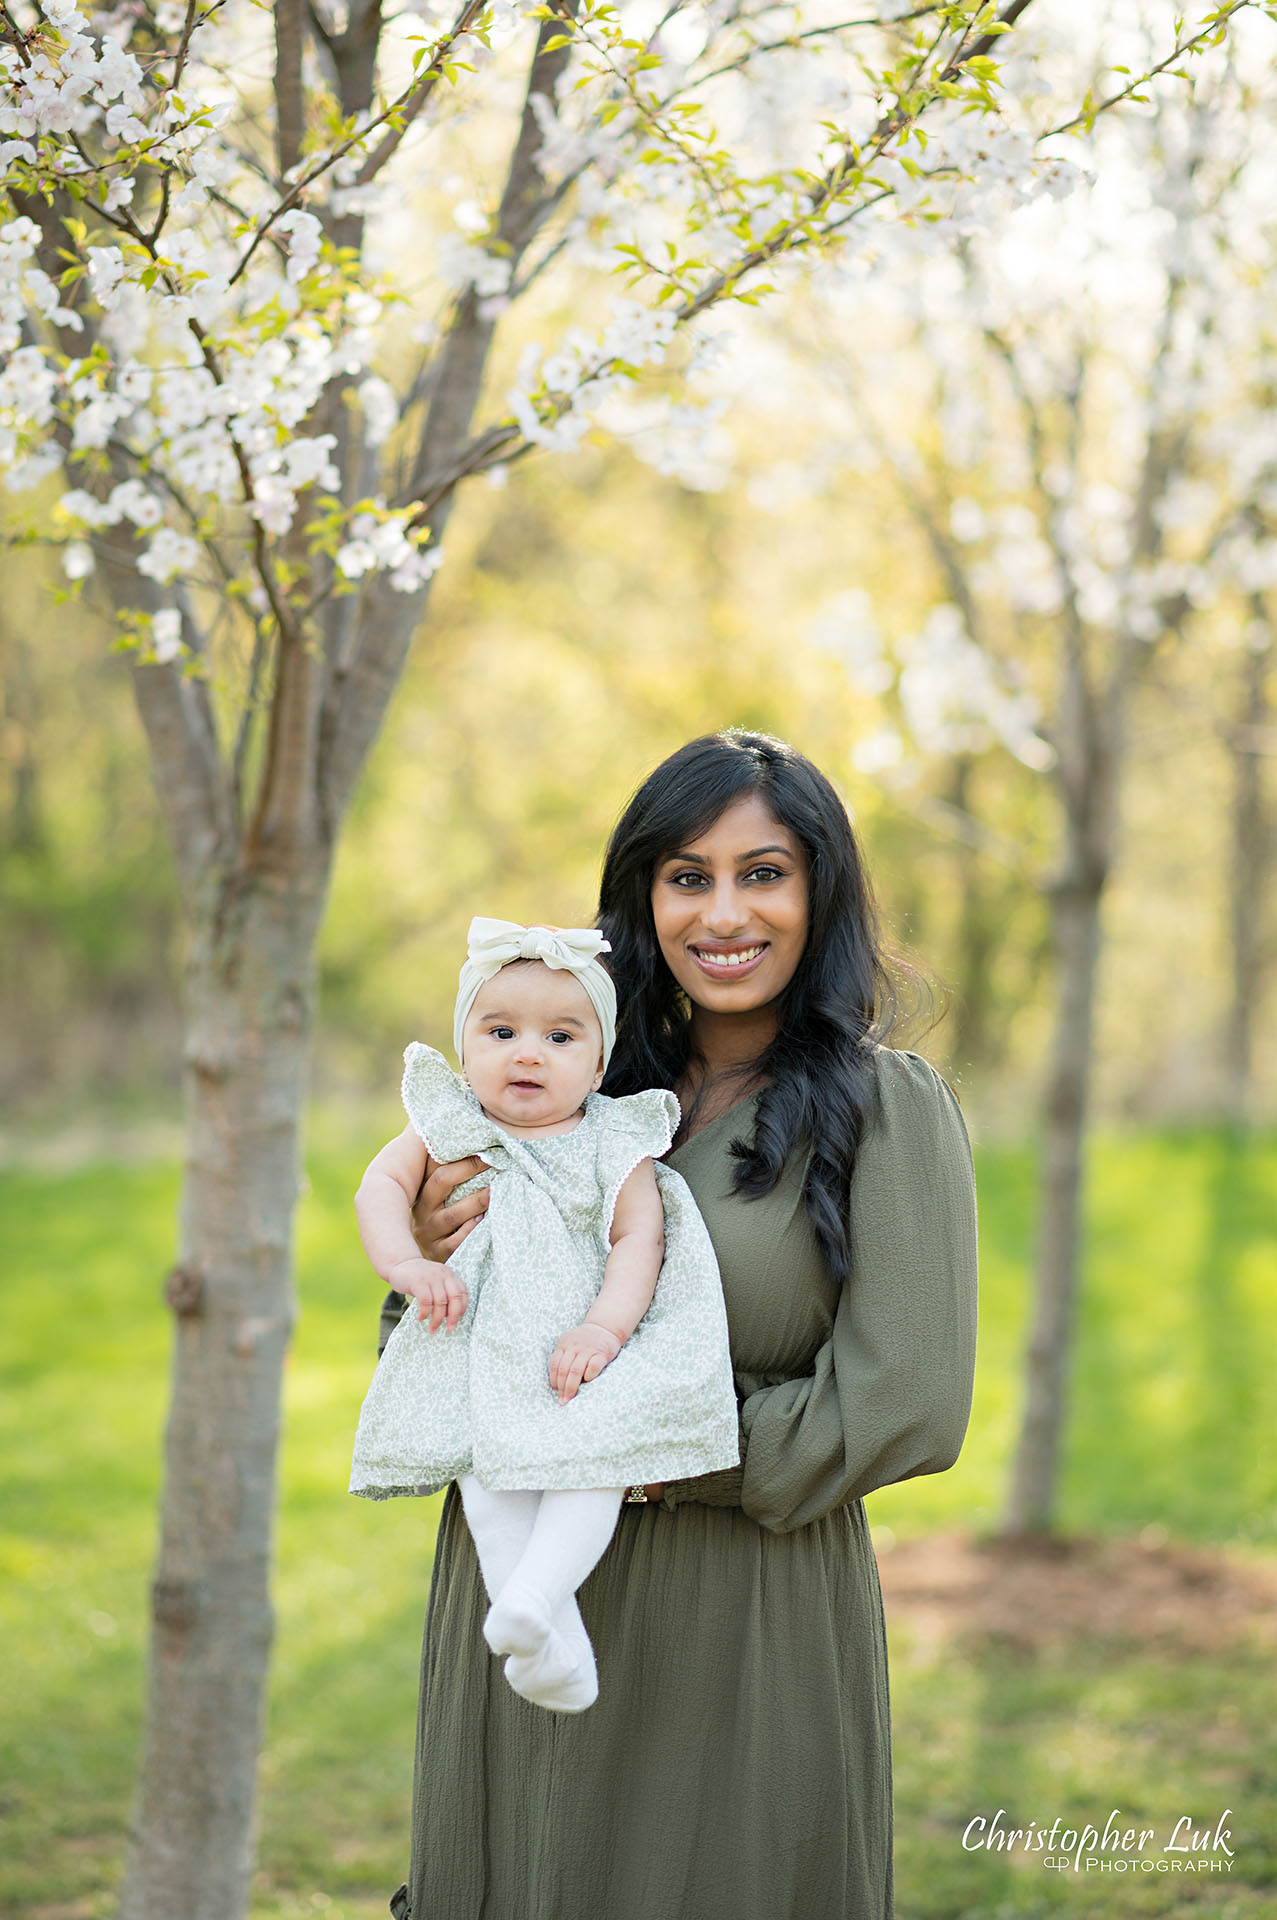 Christopher Luk Toronto Family Photographer Cherry Blossoms Mom Mommy Motherhood Baby Portrait Candid Natural Photojournalistic Organic Cute Sweet Mother Daughter Smile